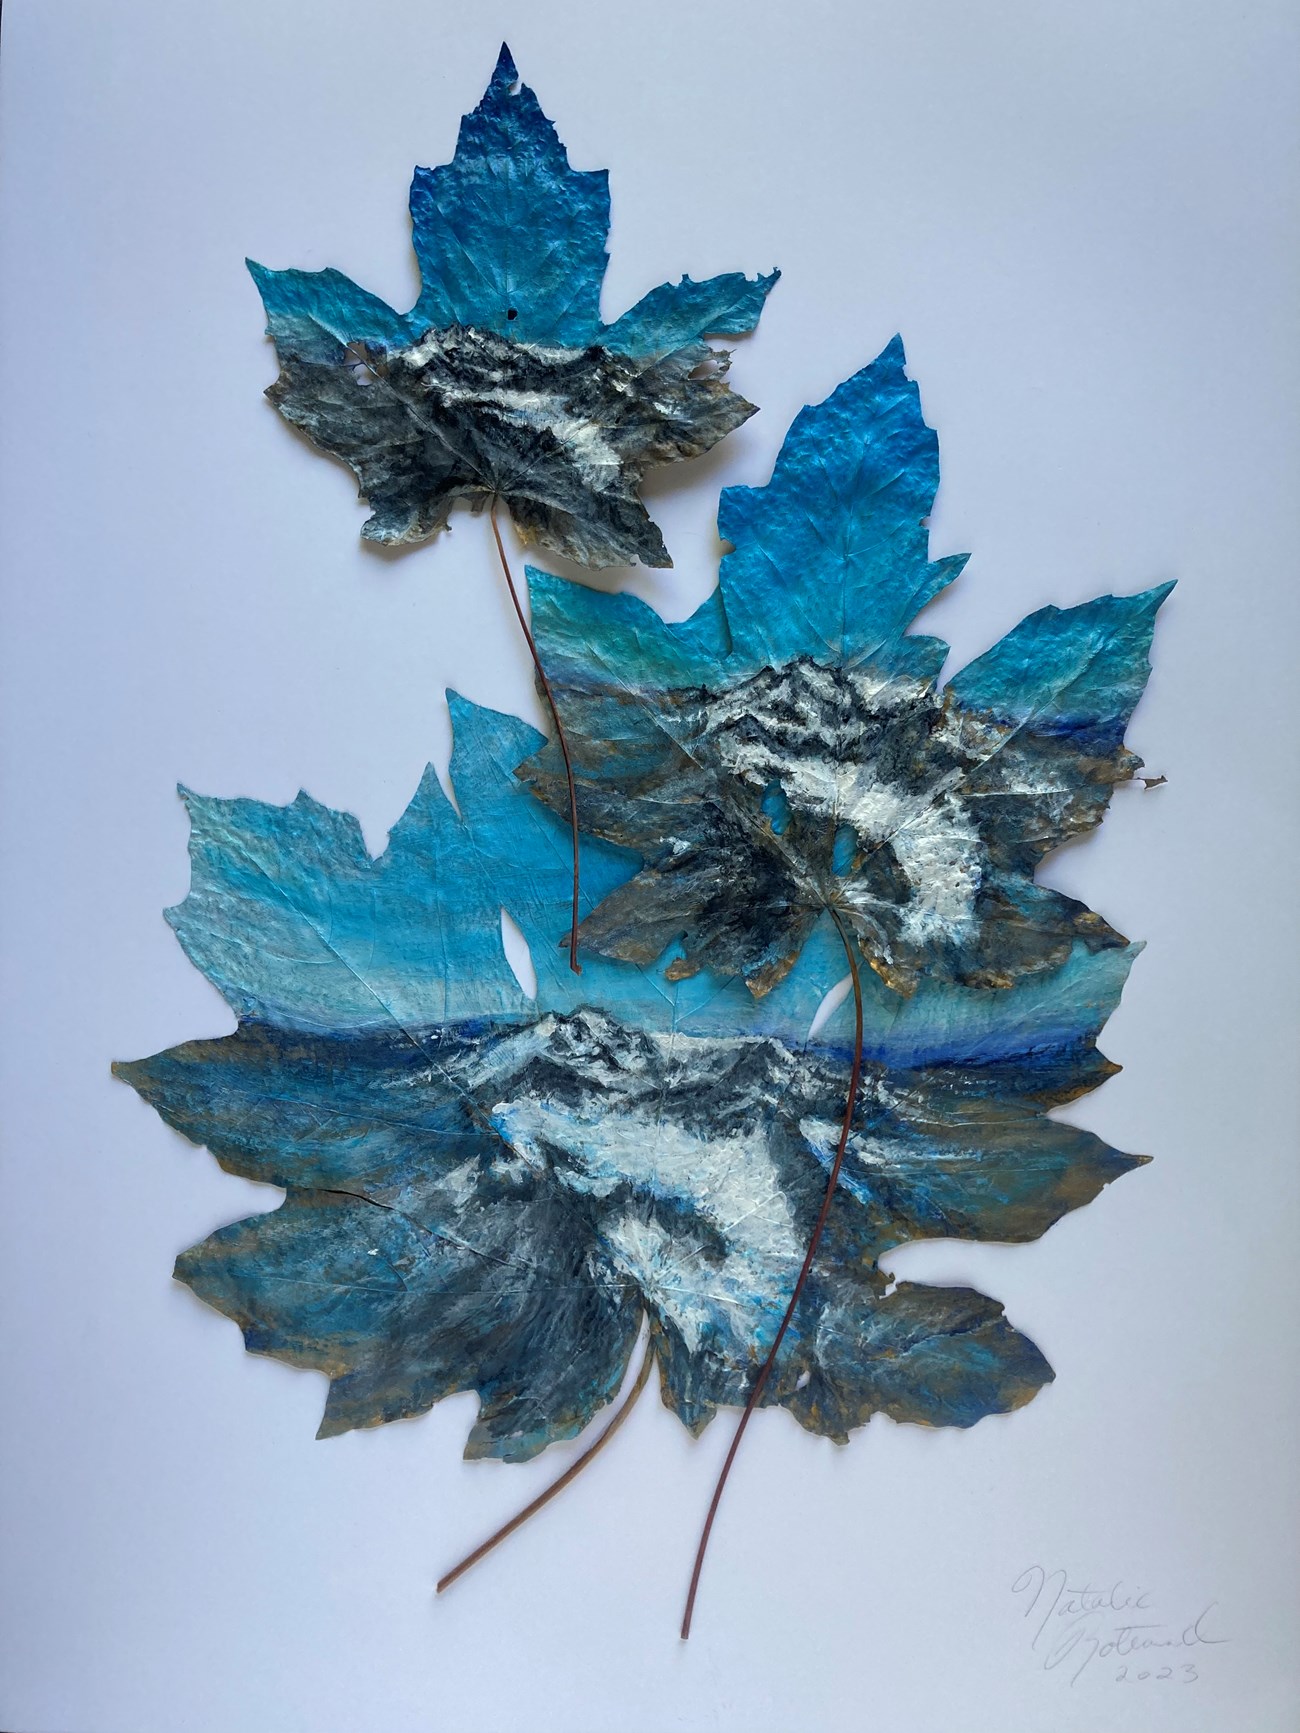 Three leaves of varying sizes with paintings of the same mountain glacier, its mass smaller and smaller on each leaf.